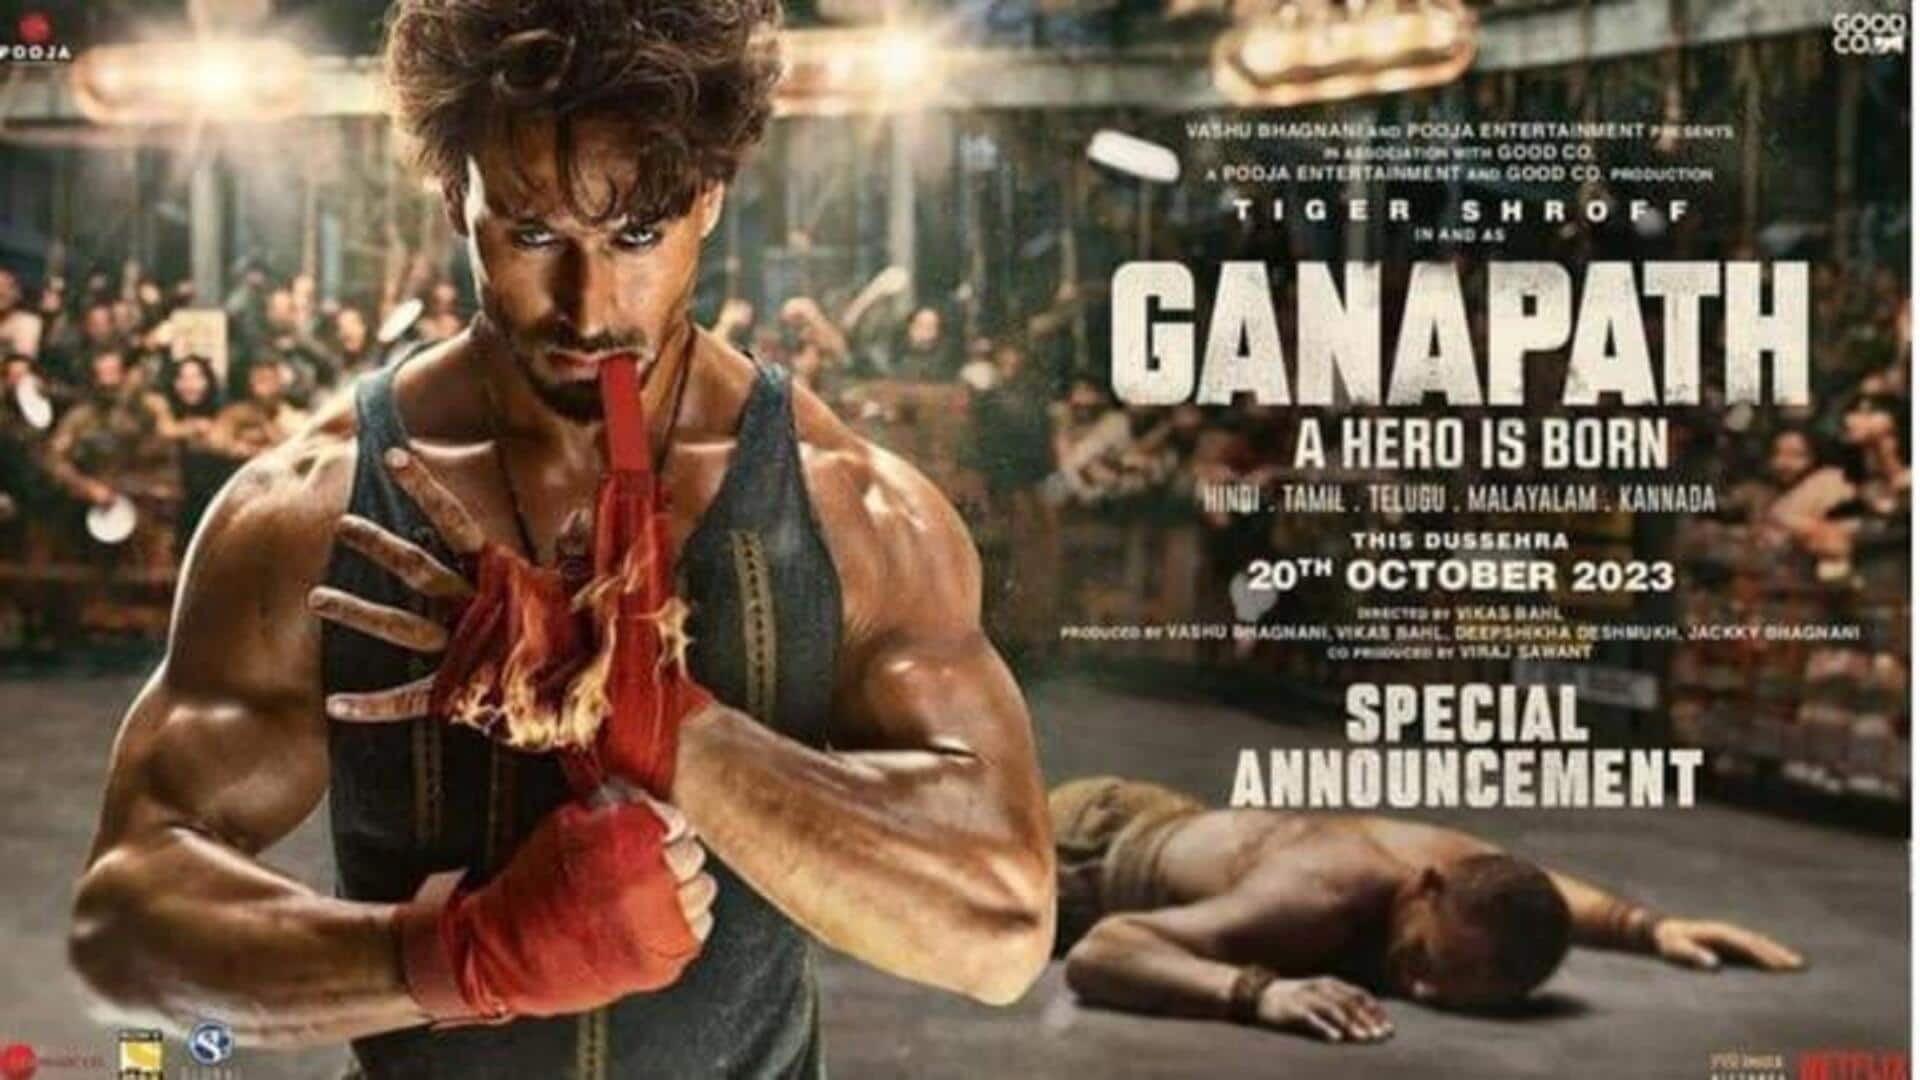 Box office: 'Ganapath' sees drop, fails to cross Rs. 5cr